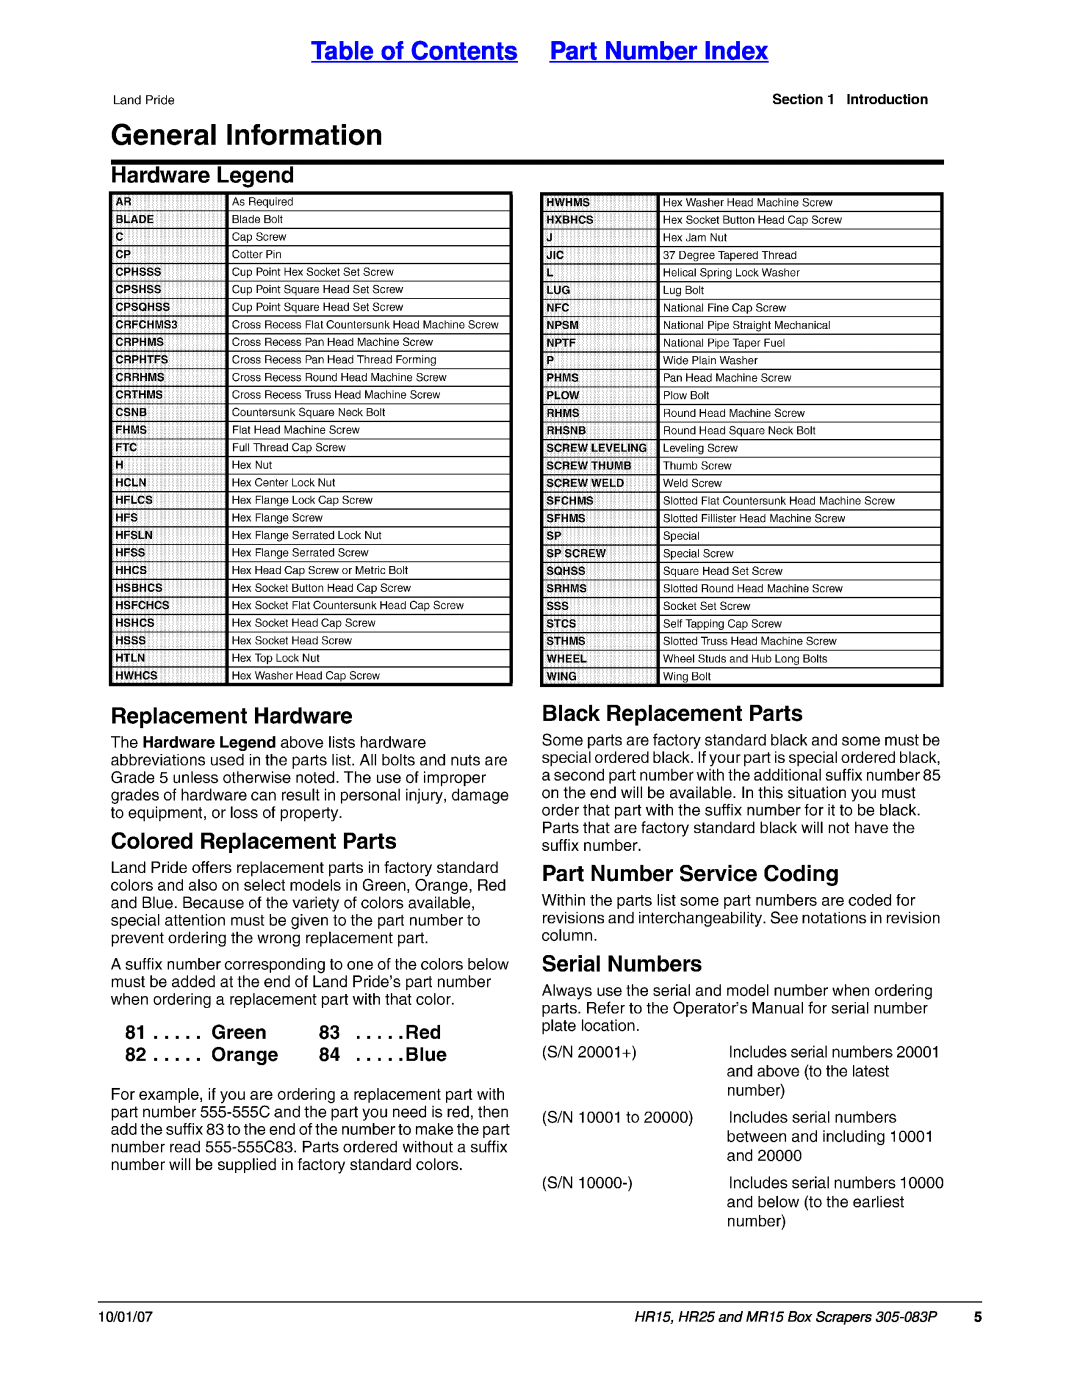 Land Pride manual Table of Contents Part Number Index, HR15, HR25 and MR15 Box Scrapers 305-083P, 10/01/07 